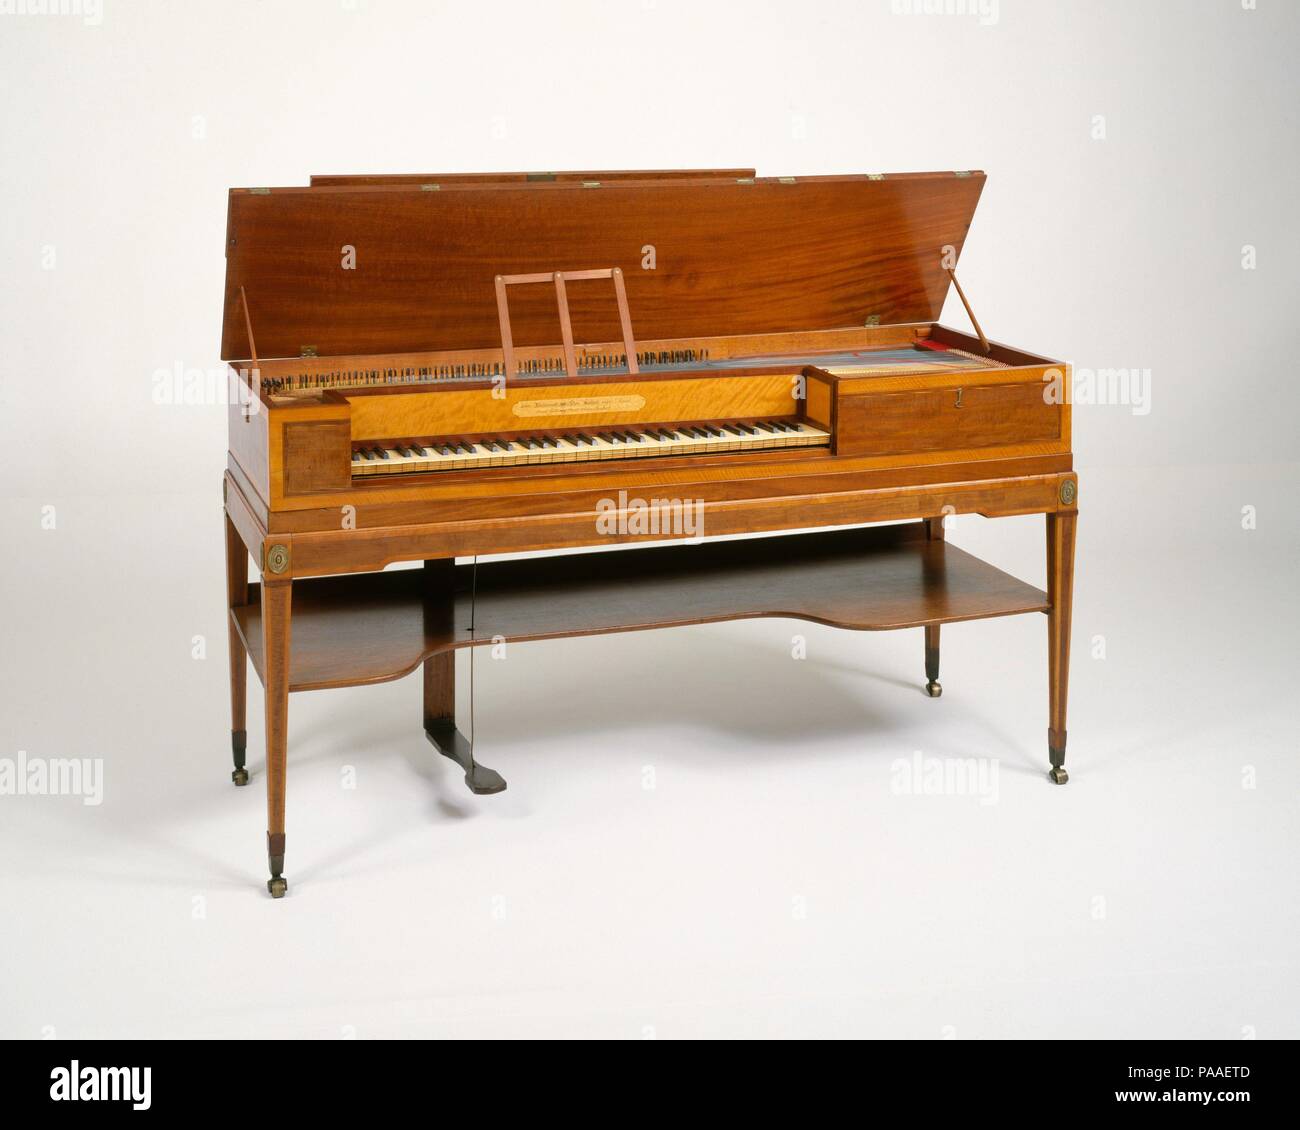 Square Piano. Culture: British. Dimensions: Case length (perpendicular to keyboard): 57.3 cm (22 5/8 in.)  Width (parallel to keyboard): 162.9 cm (64 1/8 in.)  Depth (without lid): 22.0 cm (8 3/4 in.)  Total height: 86.3 cm (34 in.)  3-octave span: 48.9  String length FF: 137.1  String length c4: 7.3  String length c2: 28.6. Maker: John Broadwood & Sons. Date: 1797.  Based on the design of Johannes Zumpe for a simple square piano design, this elegant instrument incorporates several innovations. An expanded compass of 5-1/2 octaves is possible by a design that has keys extend under the soundboa Stock Photo